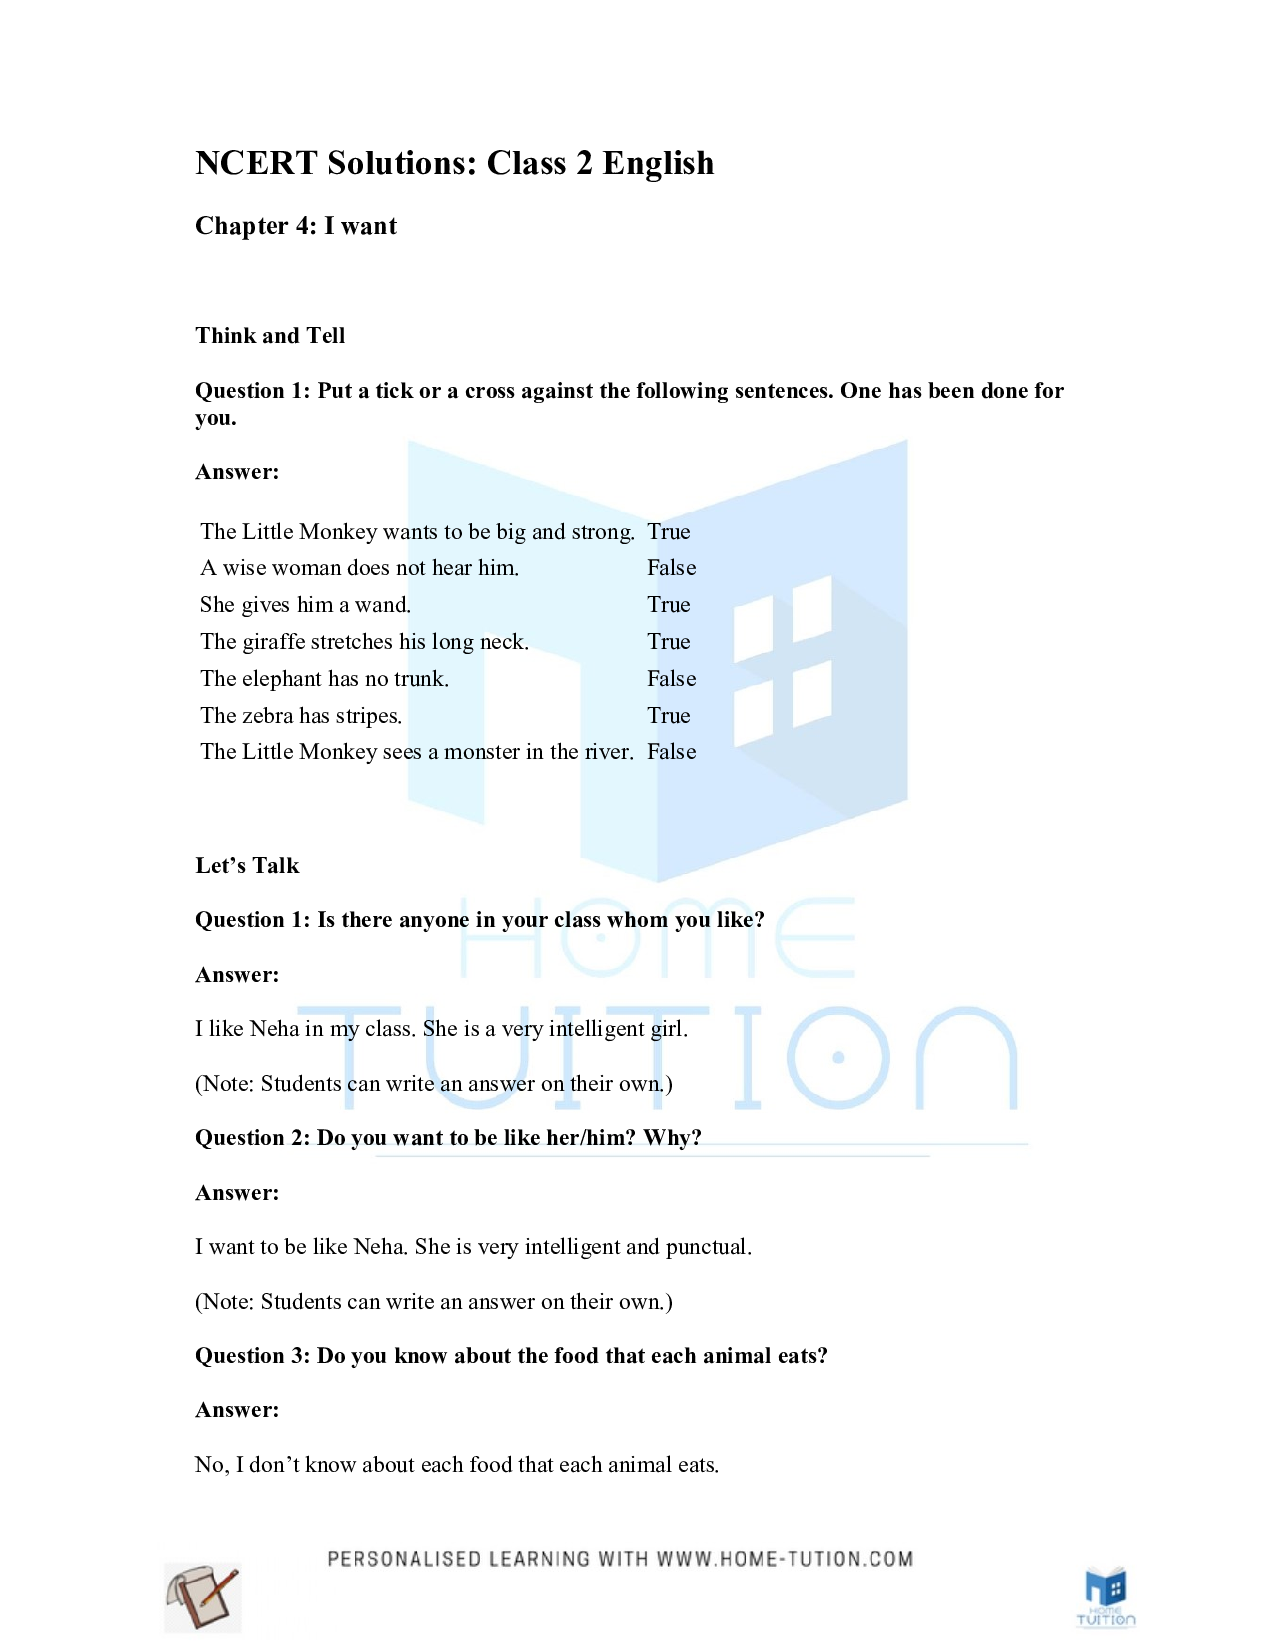 NCERT Solutions for Class 2 English I want